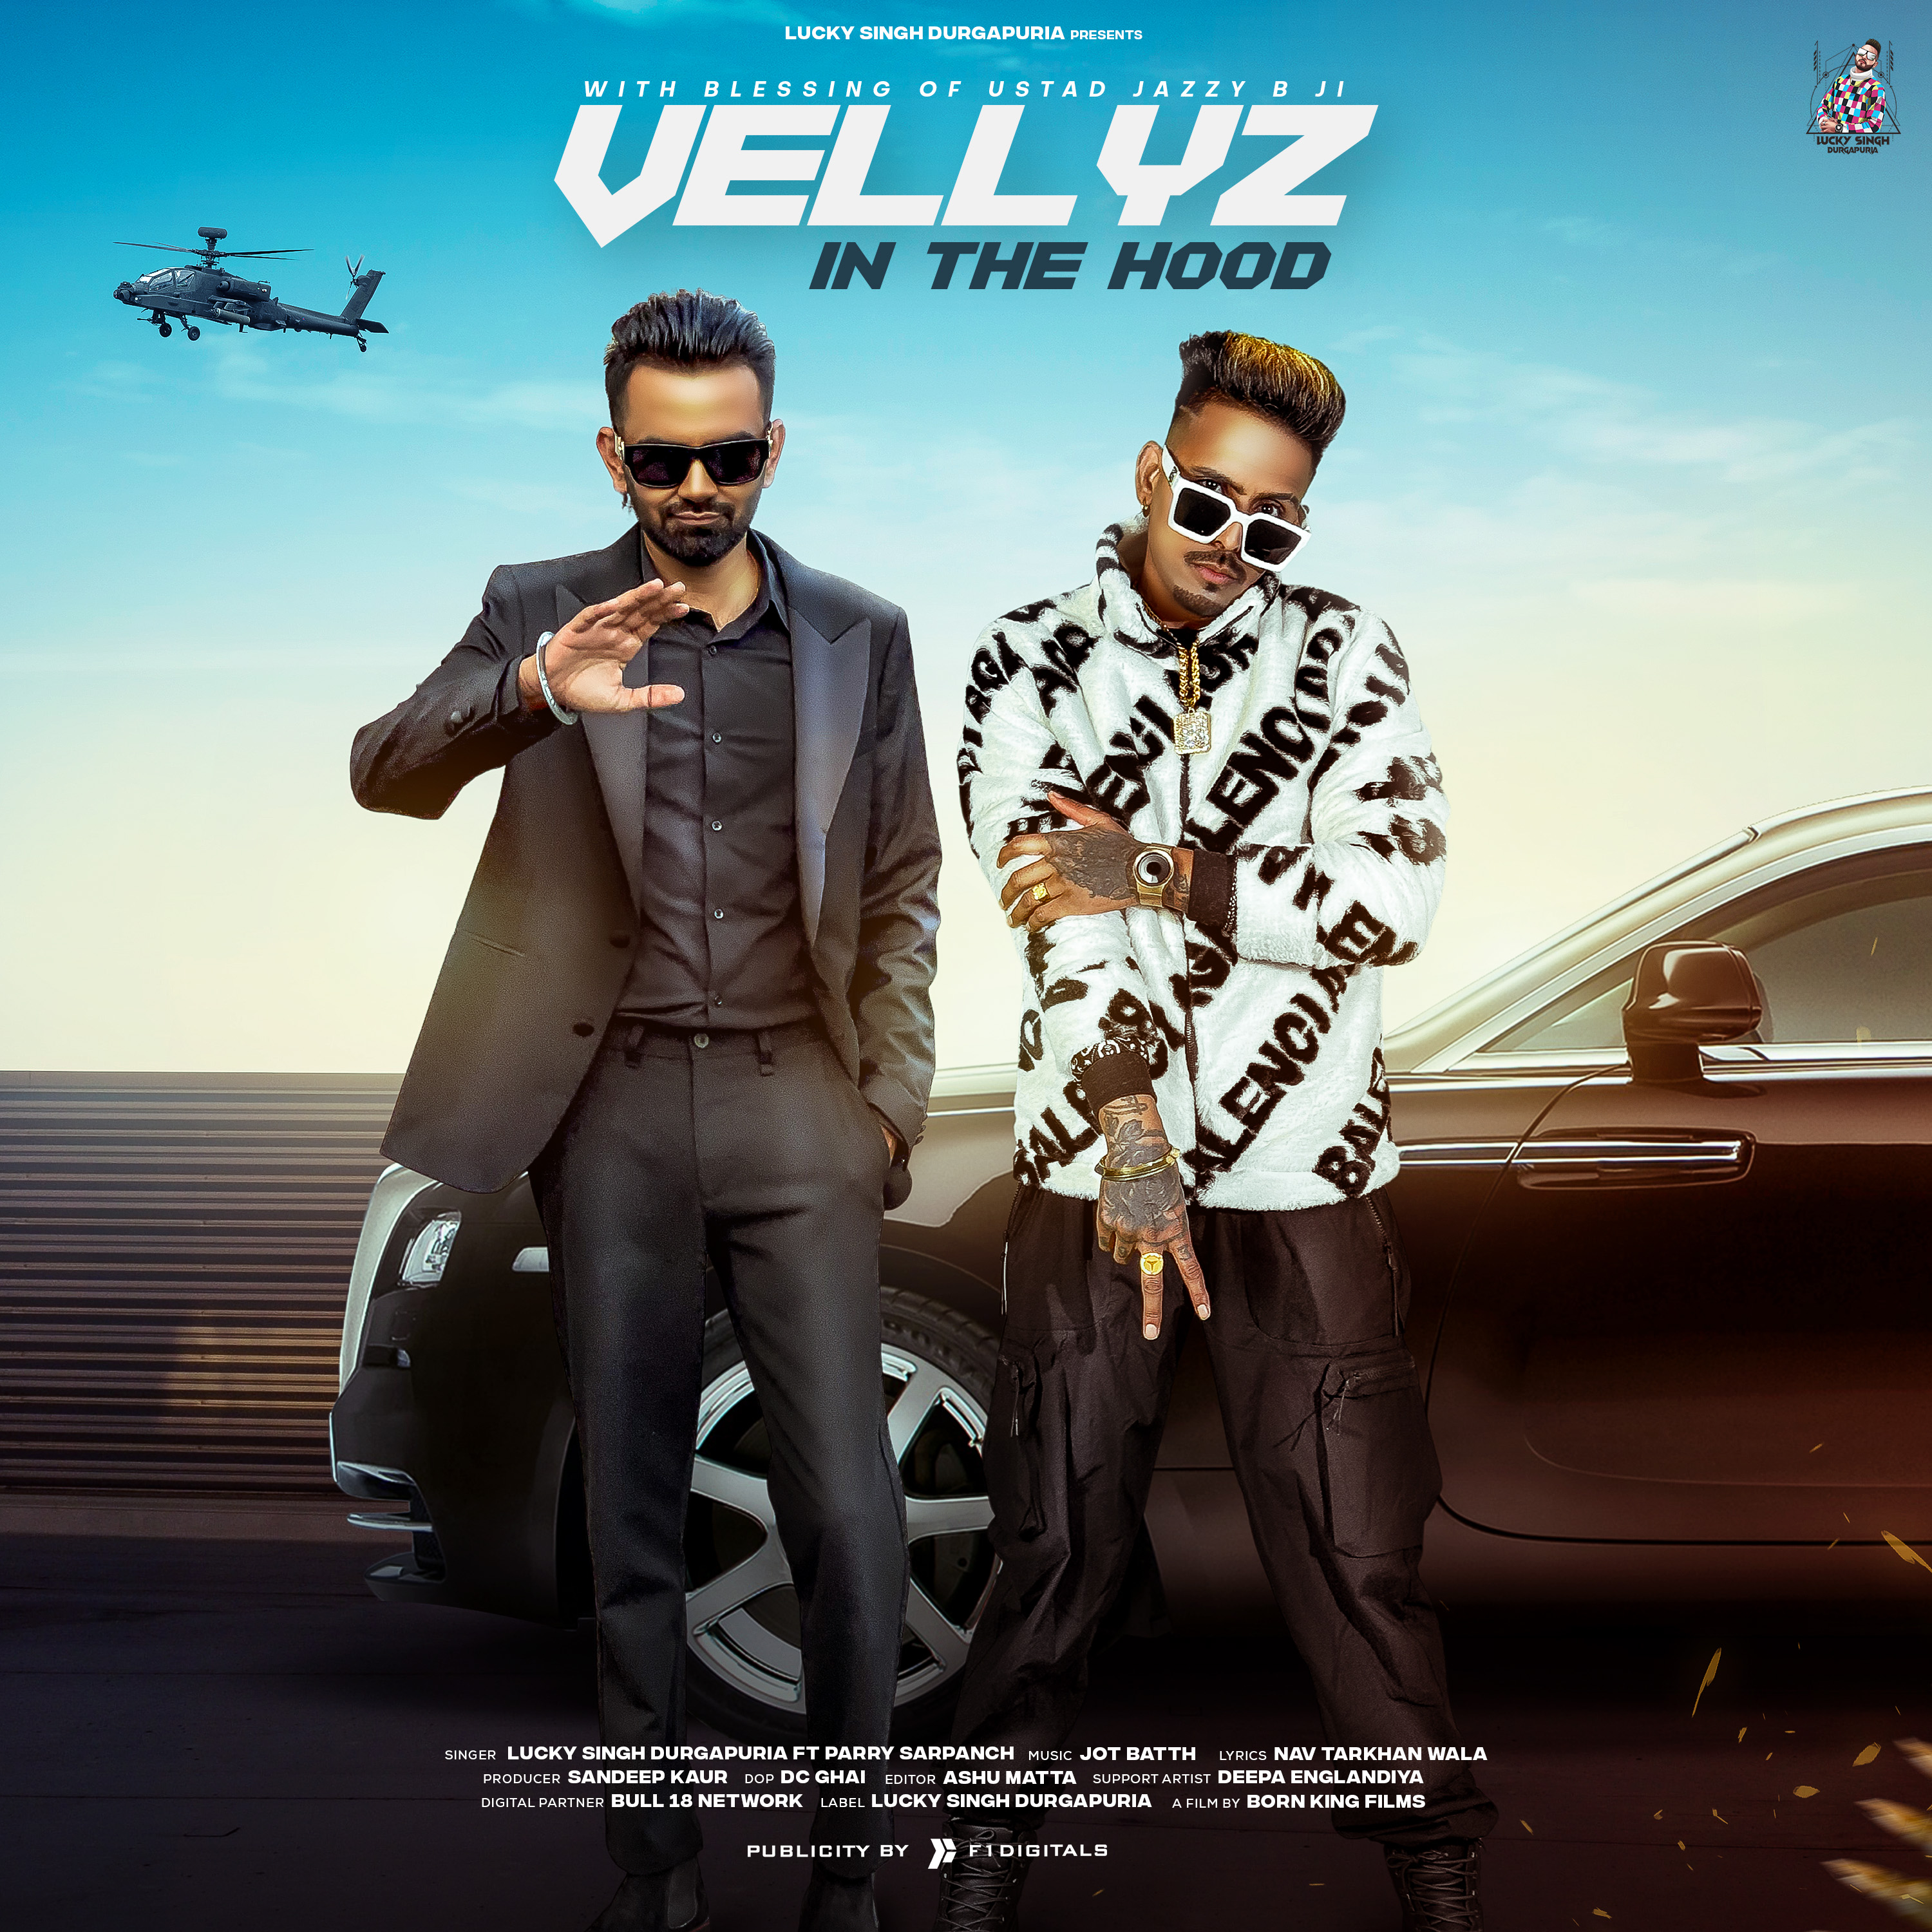 Velllyz In The Hood Lucky Singh Durgapuria Feat Parry Sarpanch